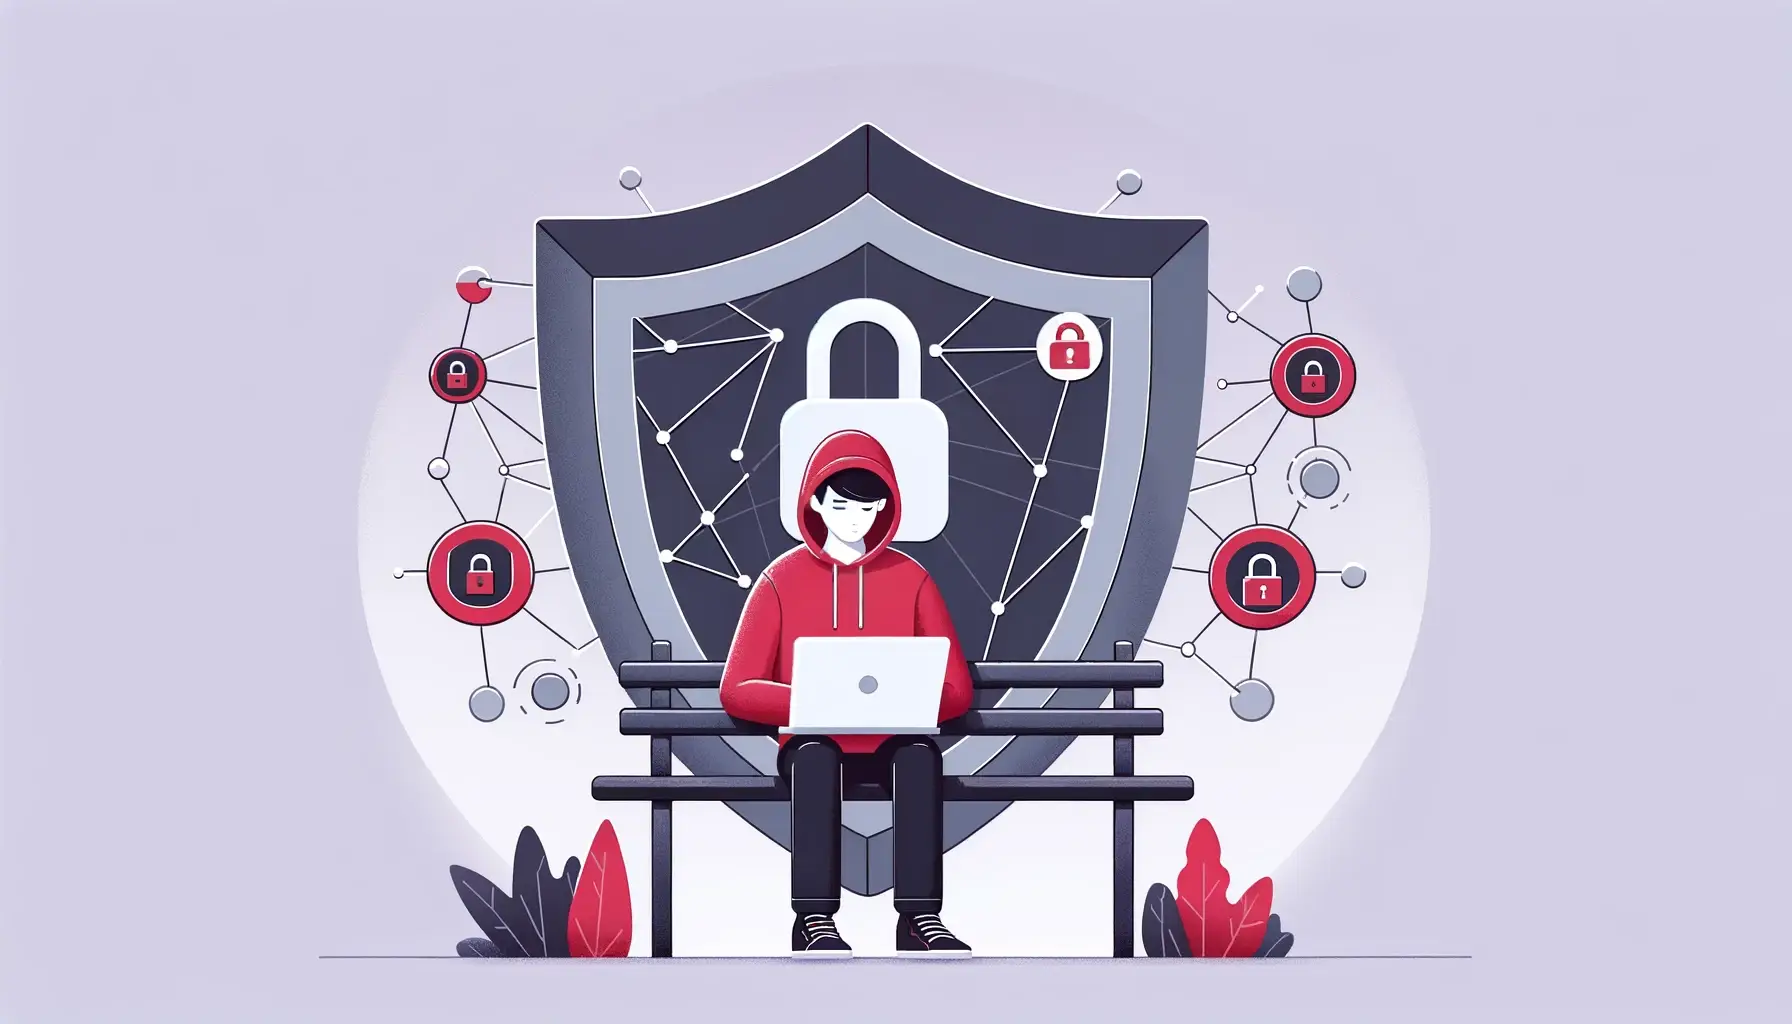 How to Protect Your Website From Hackers